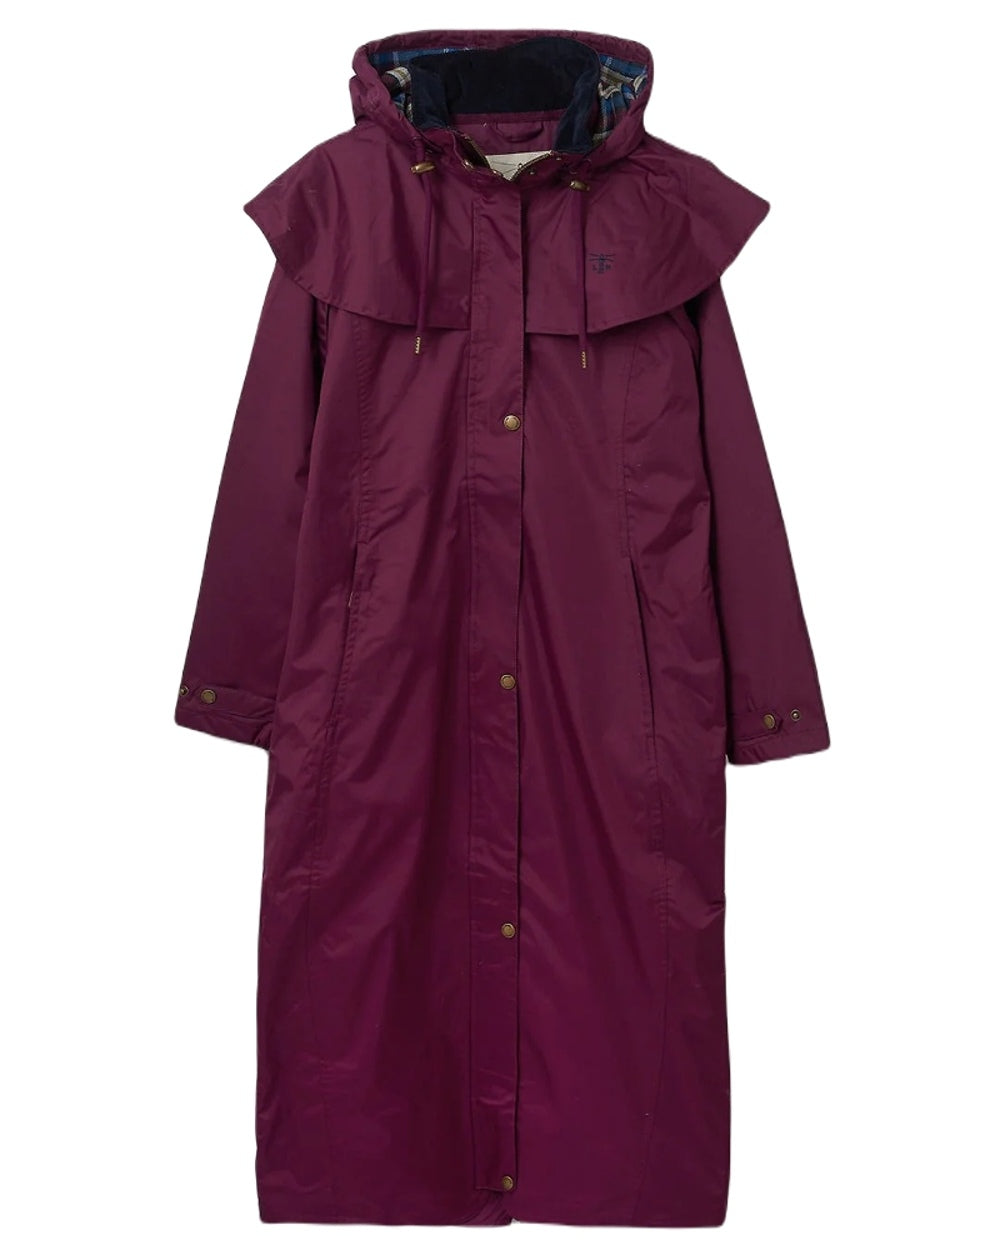 Lighthouse Outback Full Length Ladies Waterproof Raincoat - Clearance